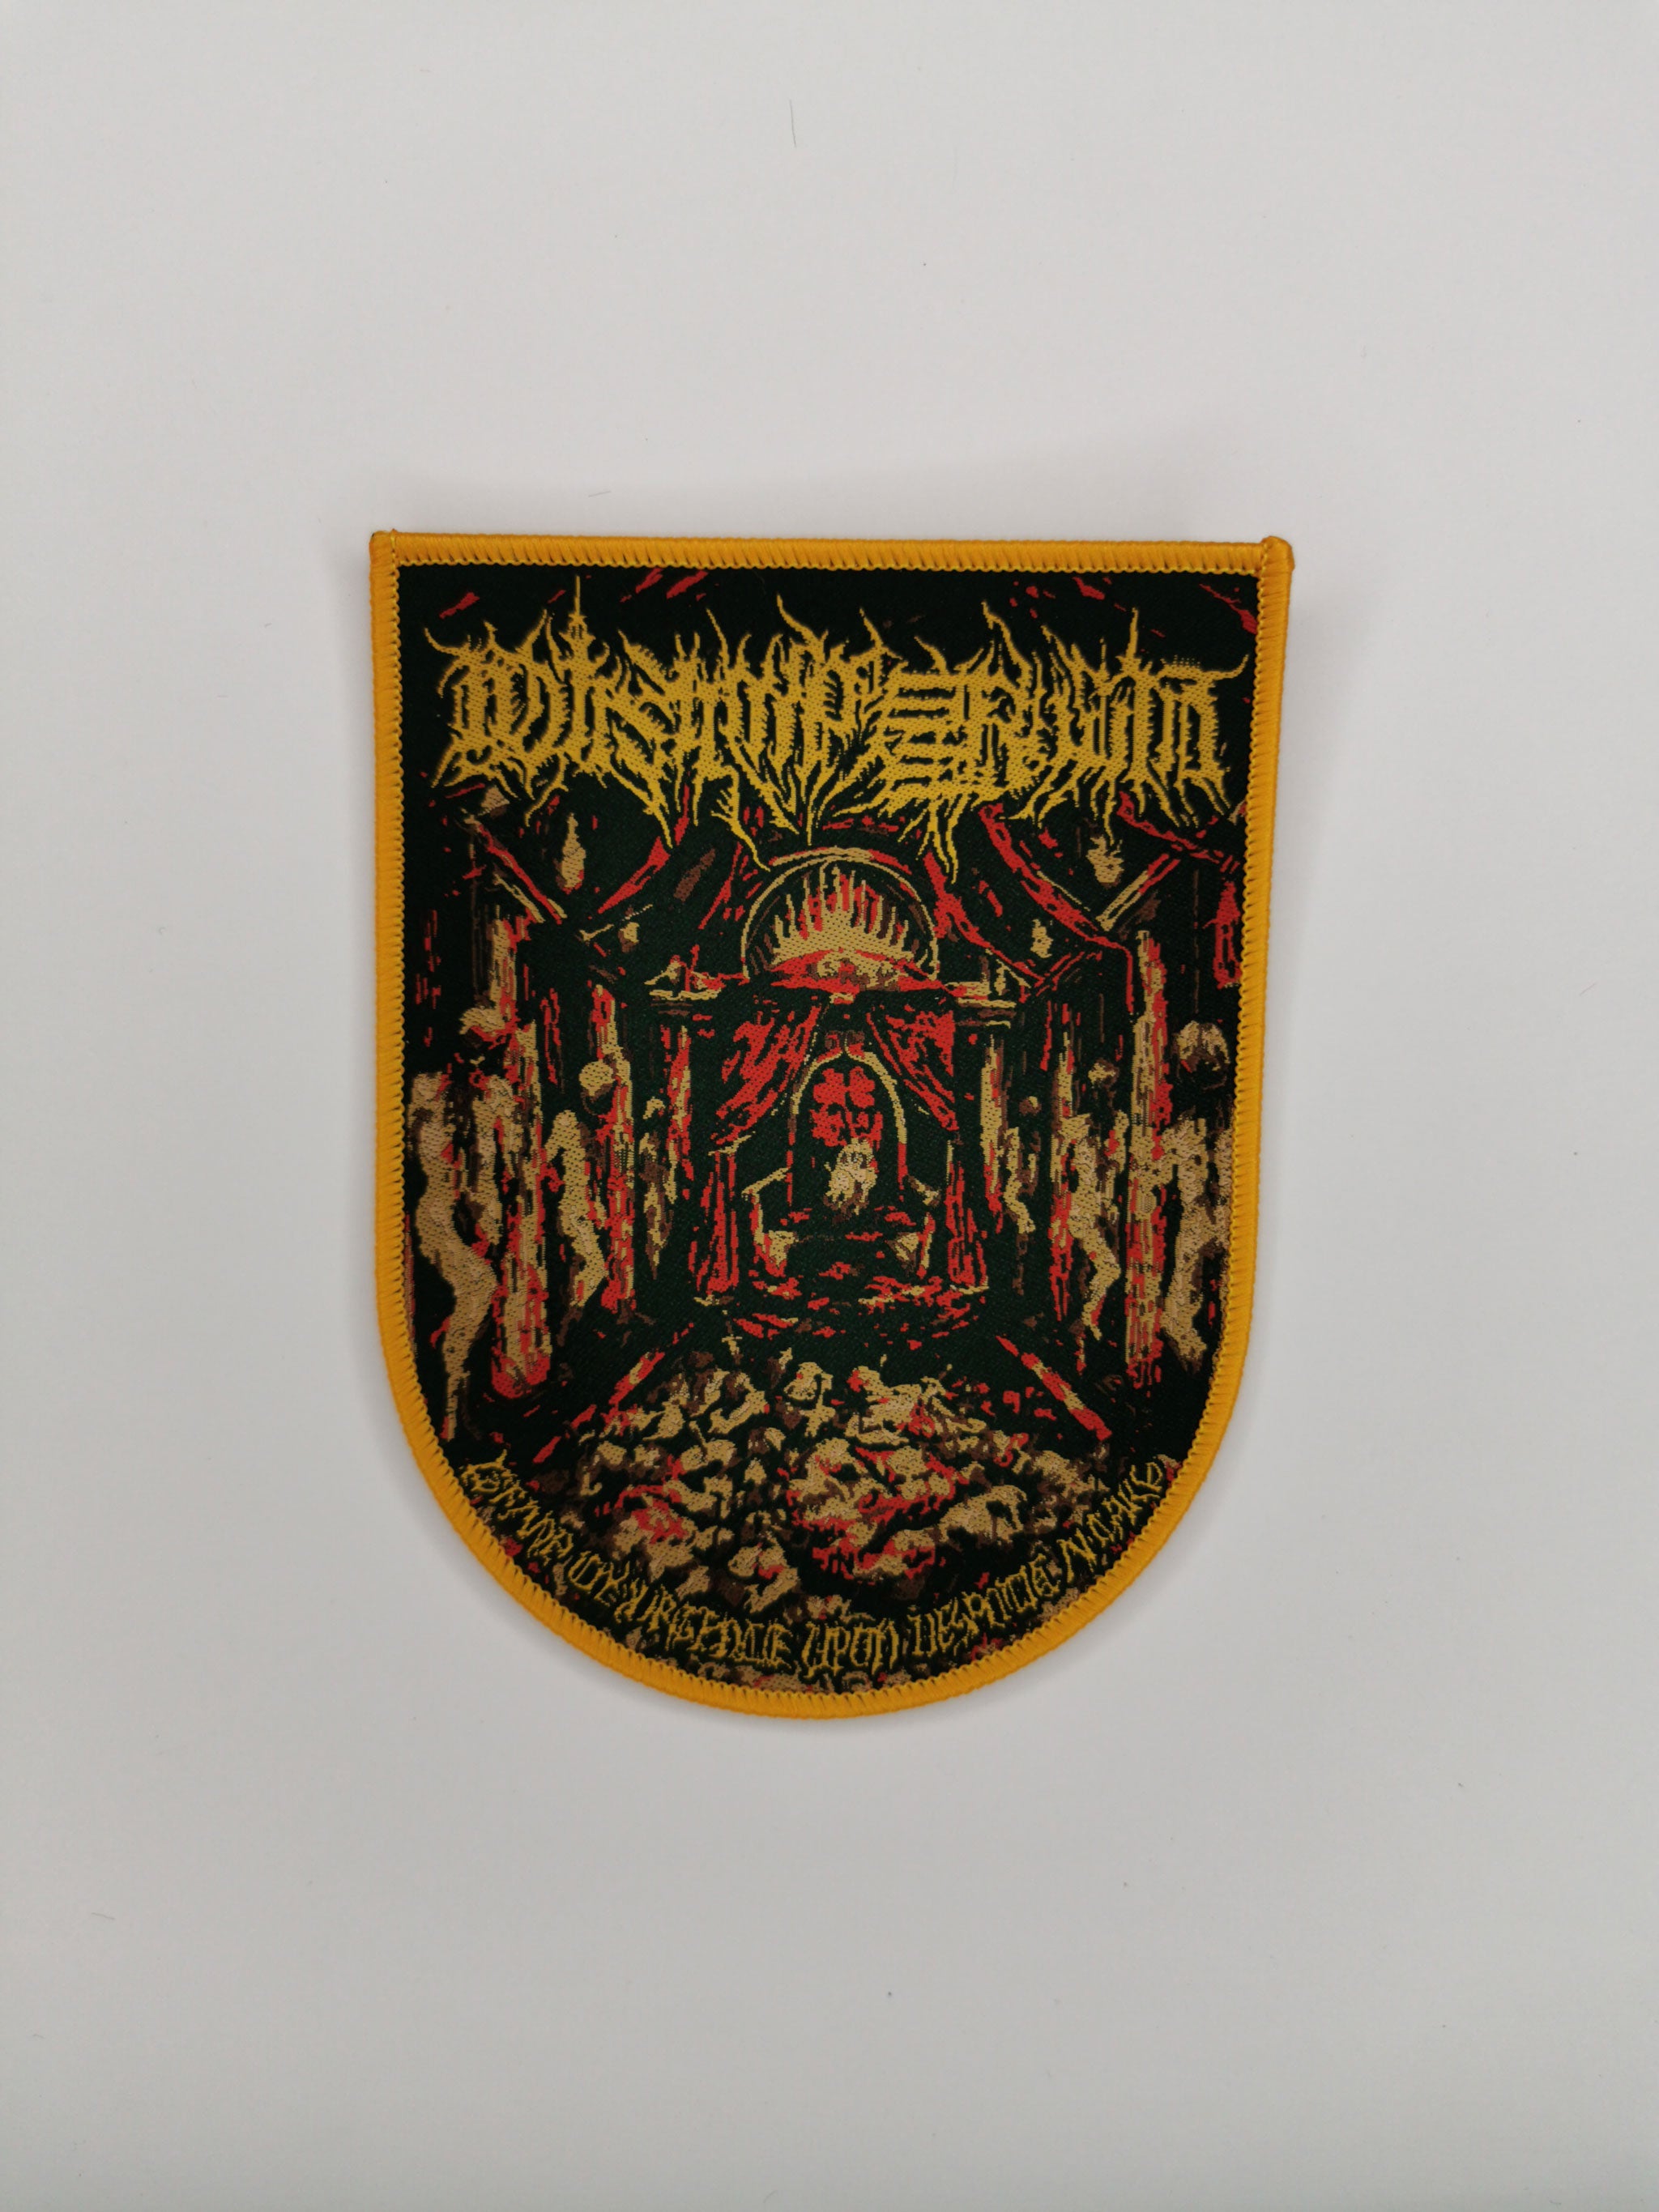 Wombbath - Internal Caustic Torments - Woven Patch – Temporal Dimensions  Patches